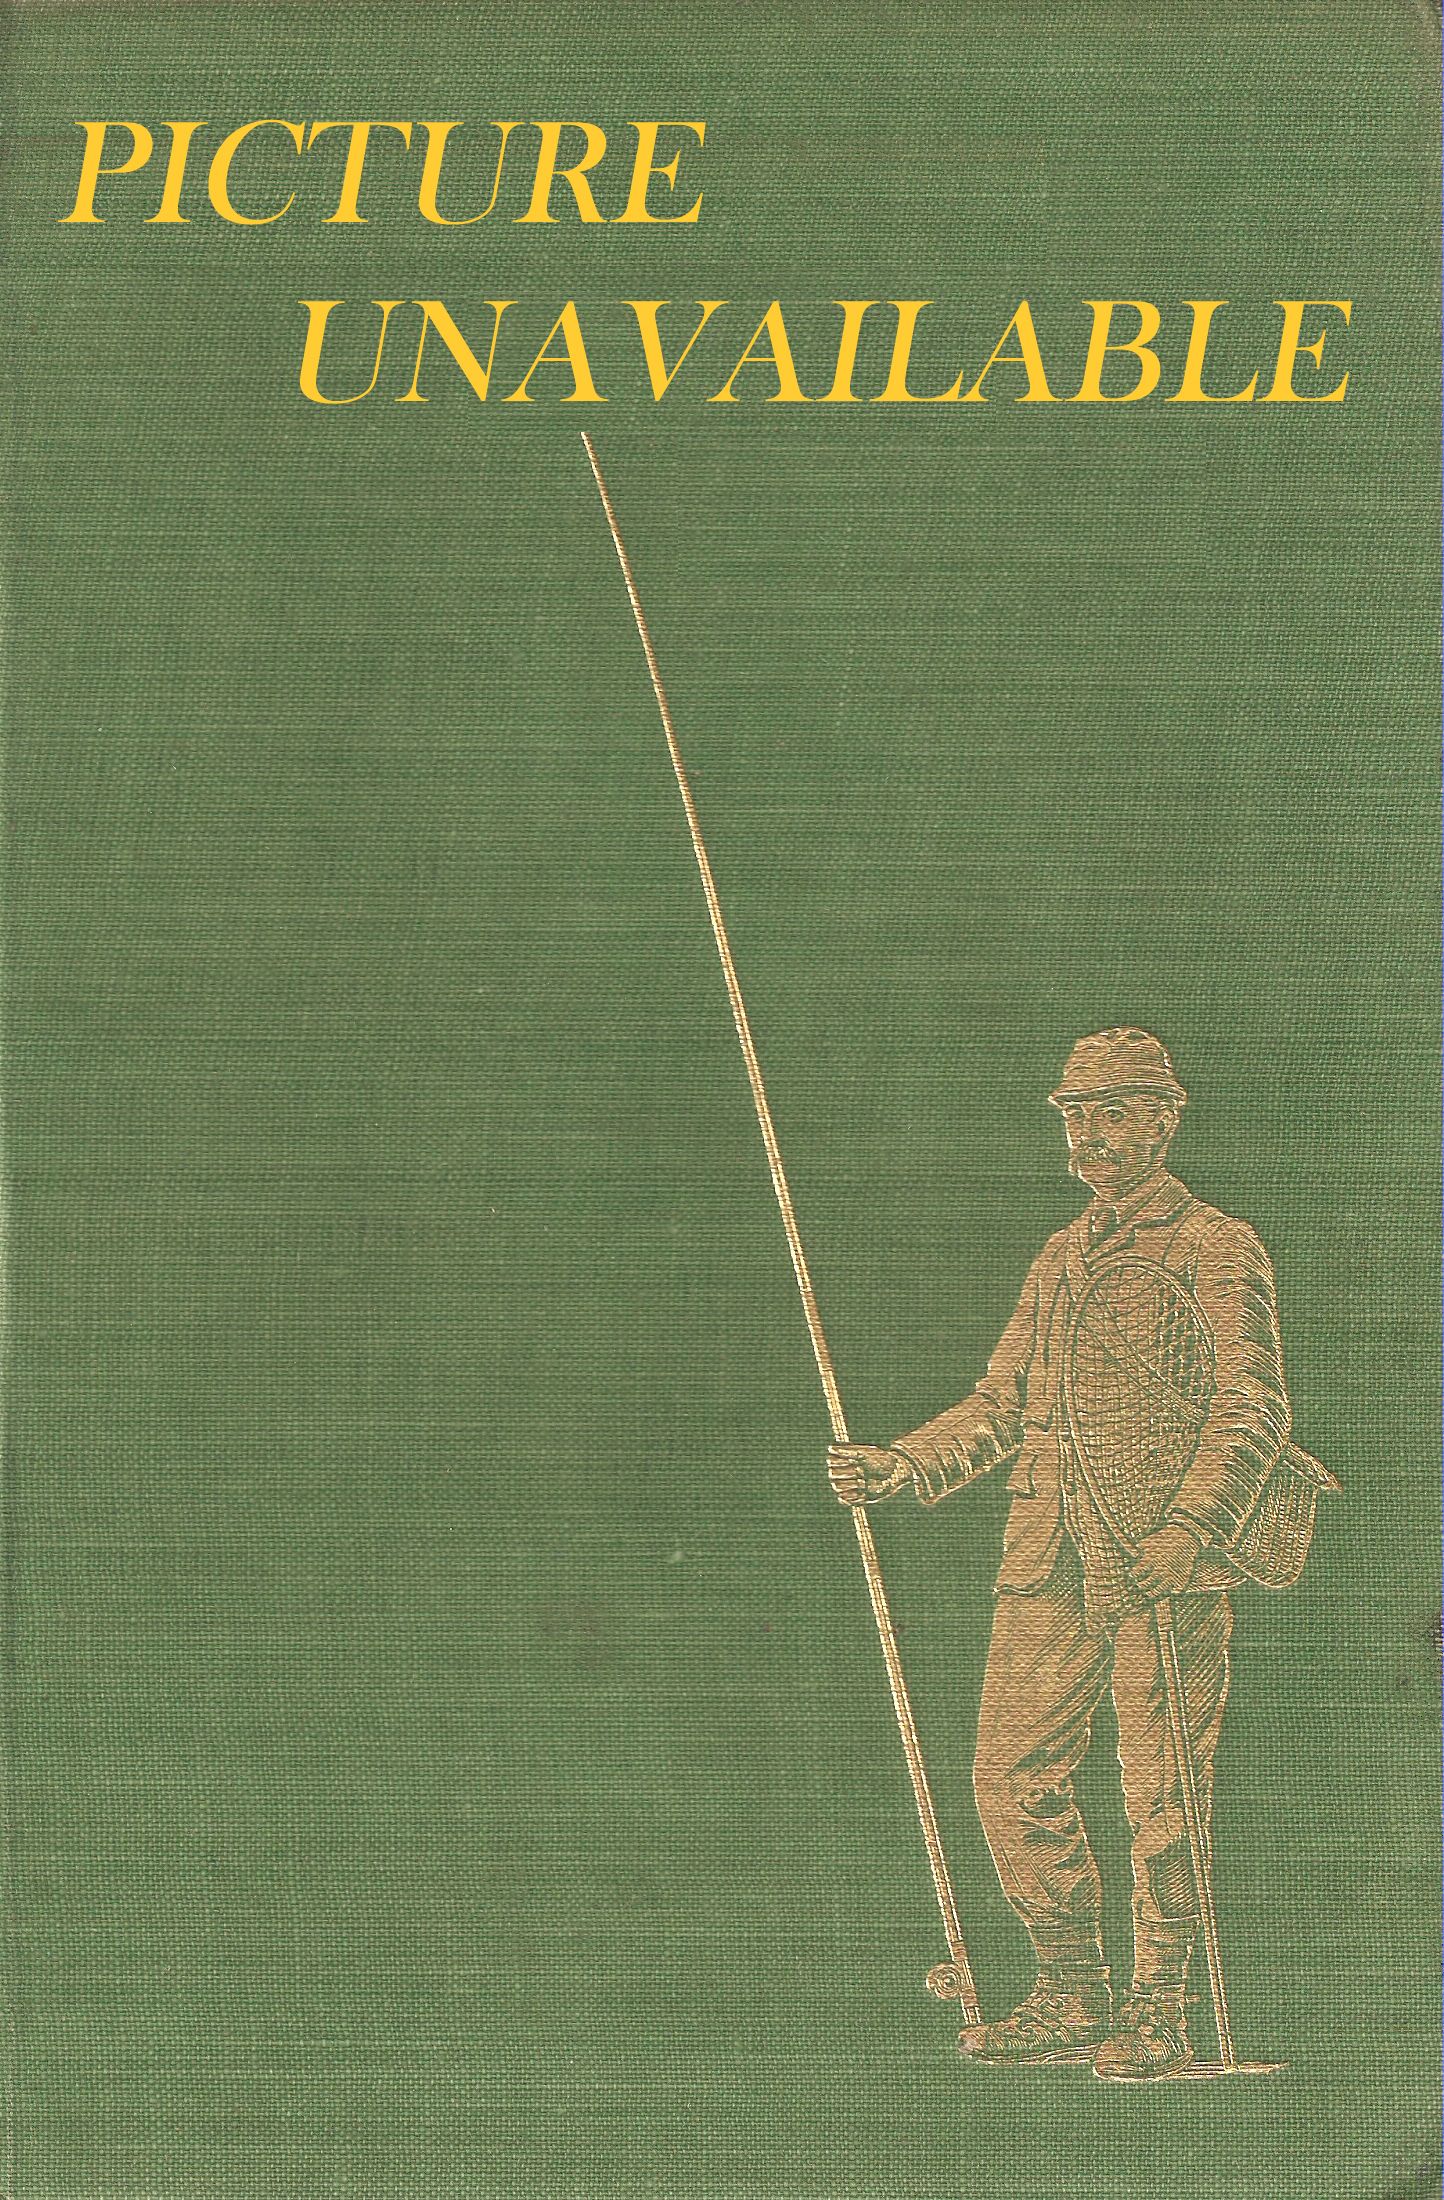 THE ANGLER'S COMPANION. By Bernard Venables. First edition